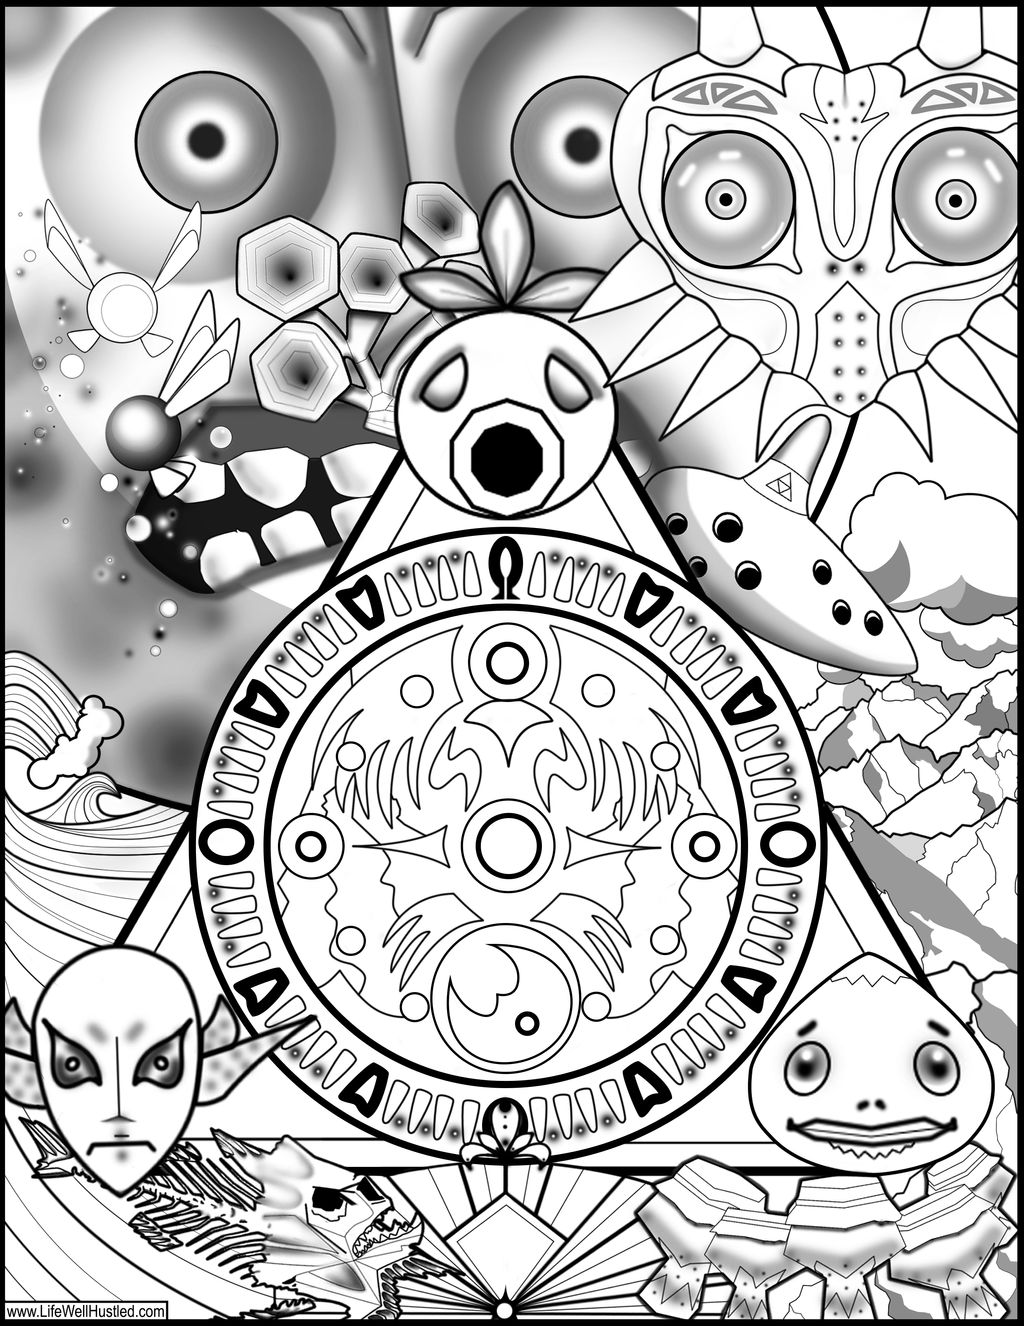 Majoras mask coloring page by cosmicordia on